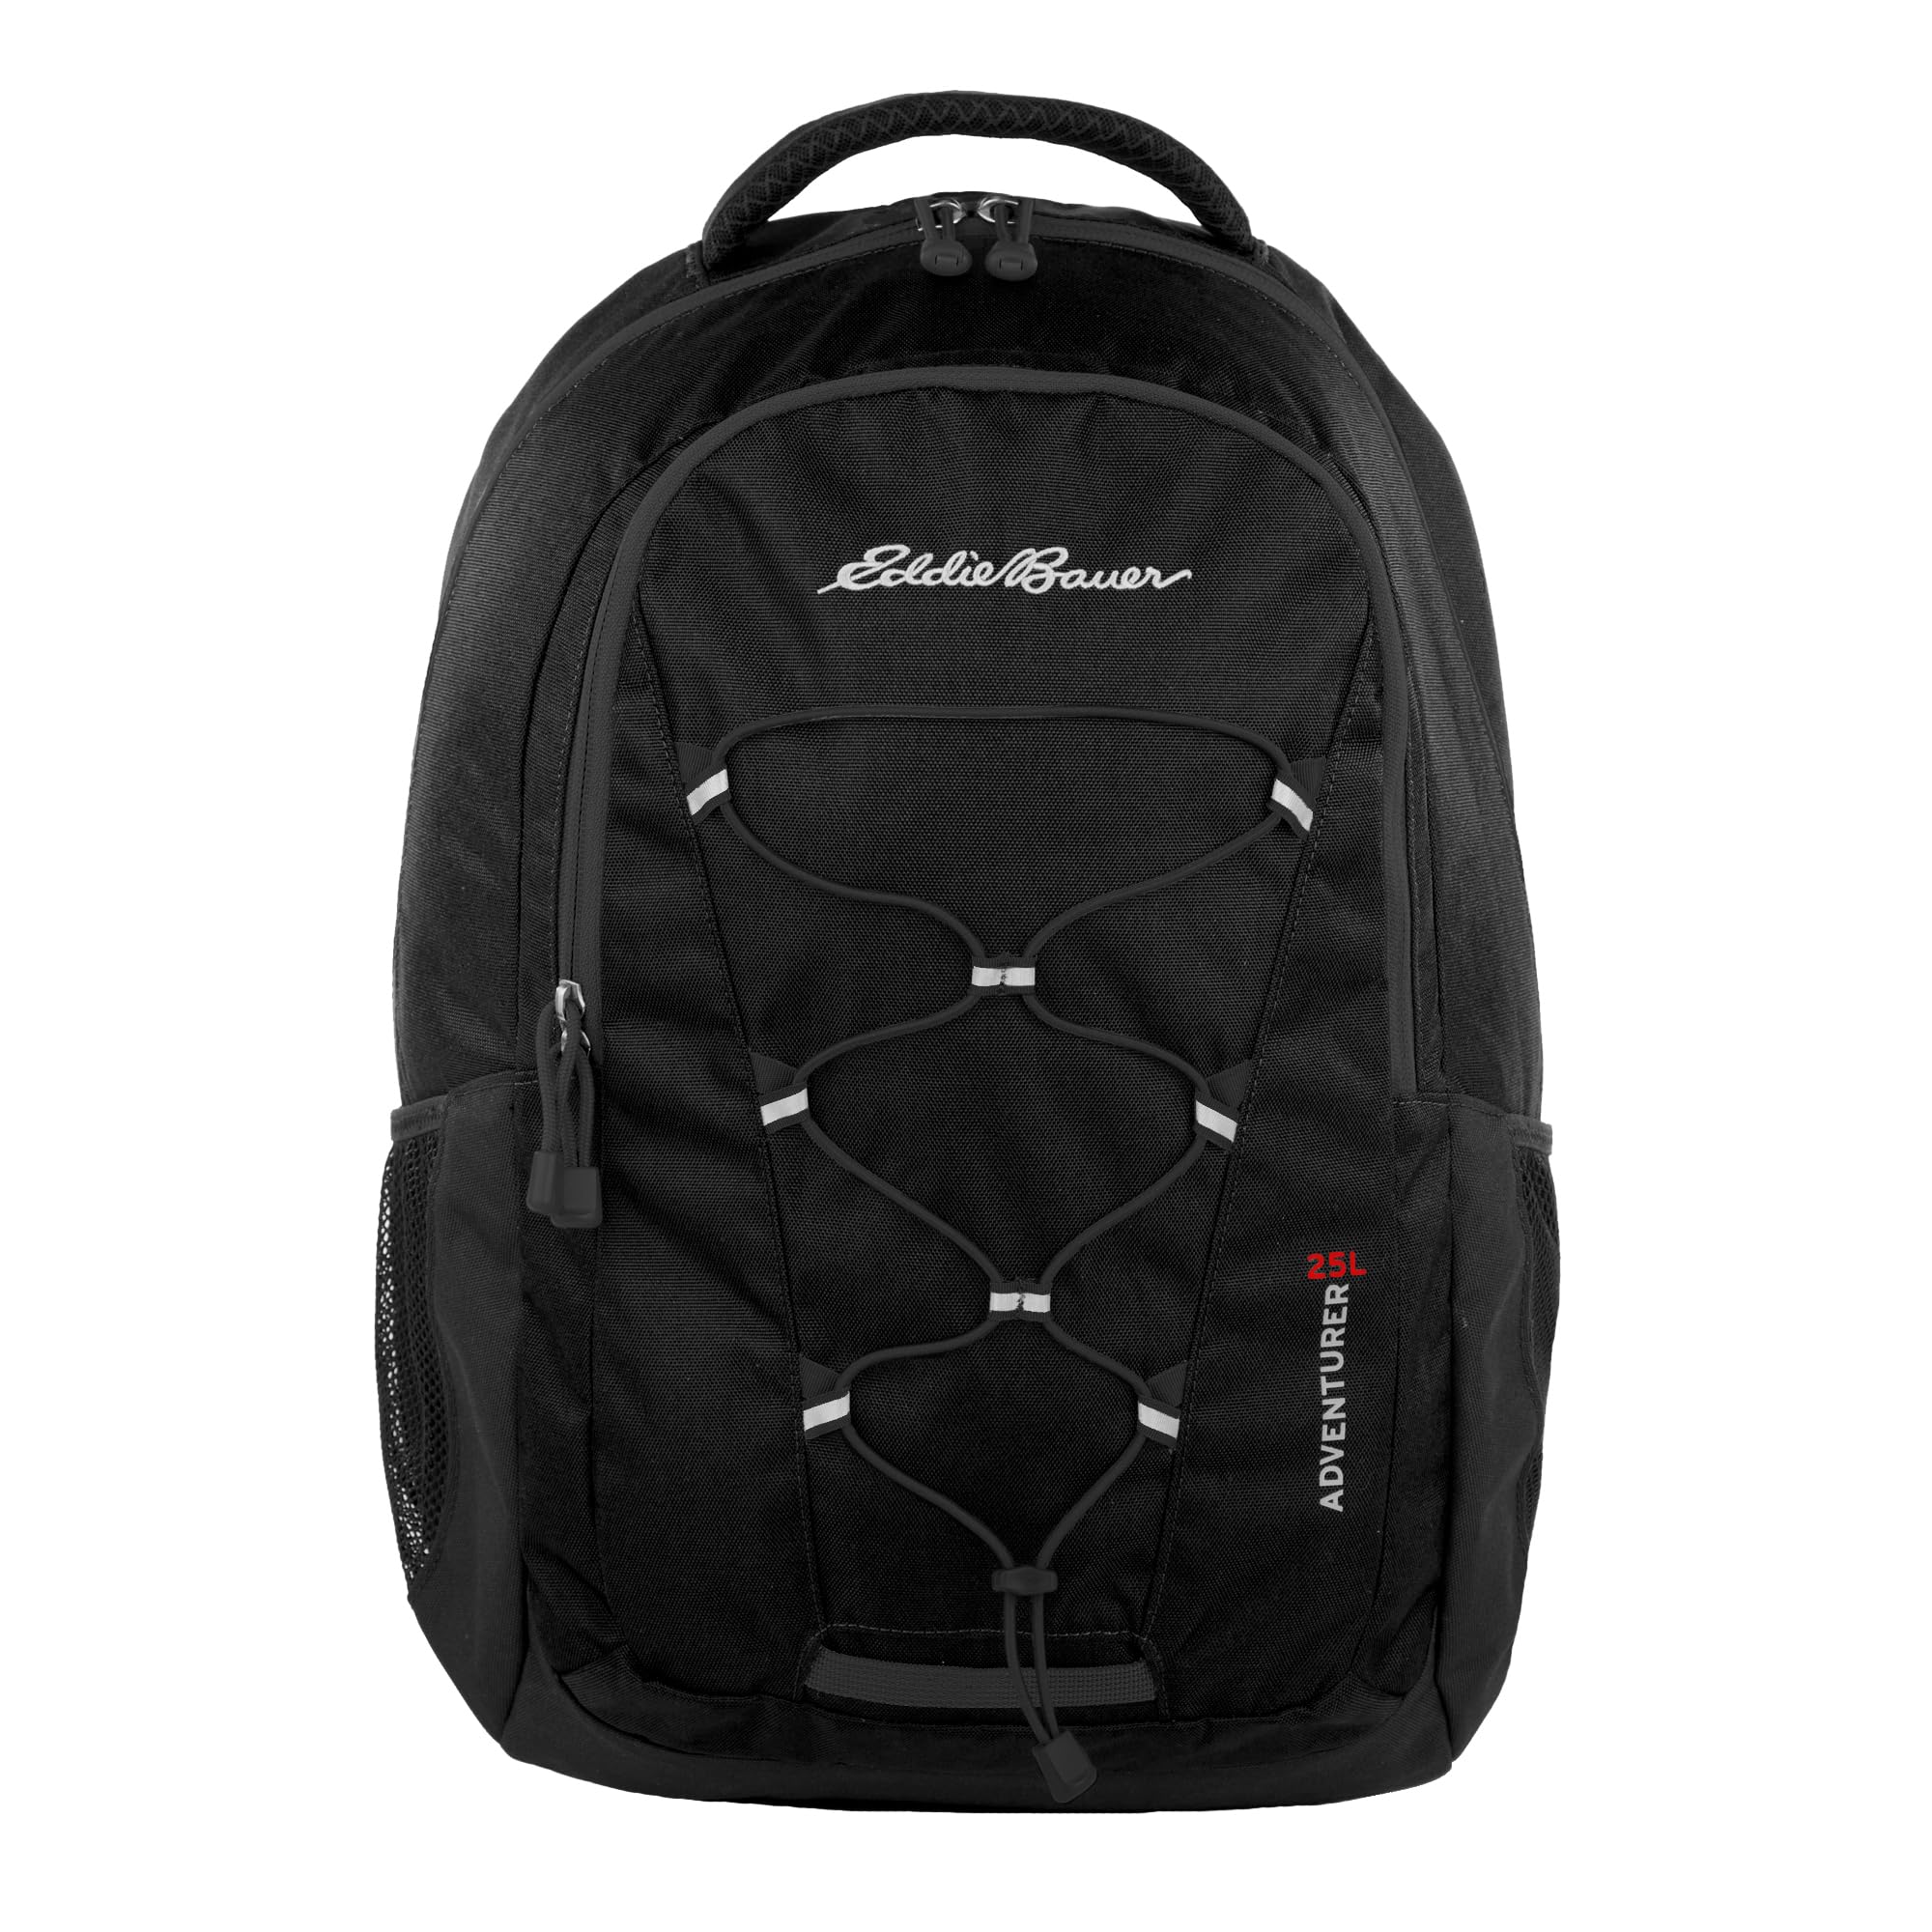 Eddie Bauer Backpack with Organization Compartments and Hydration/Laptop Compatible Sleeve (Multiple Sizes Available), Adventurer-Black, 25L